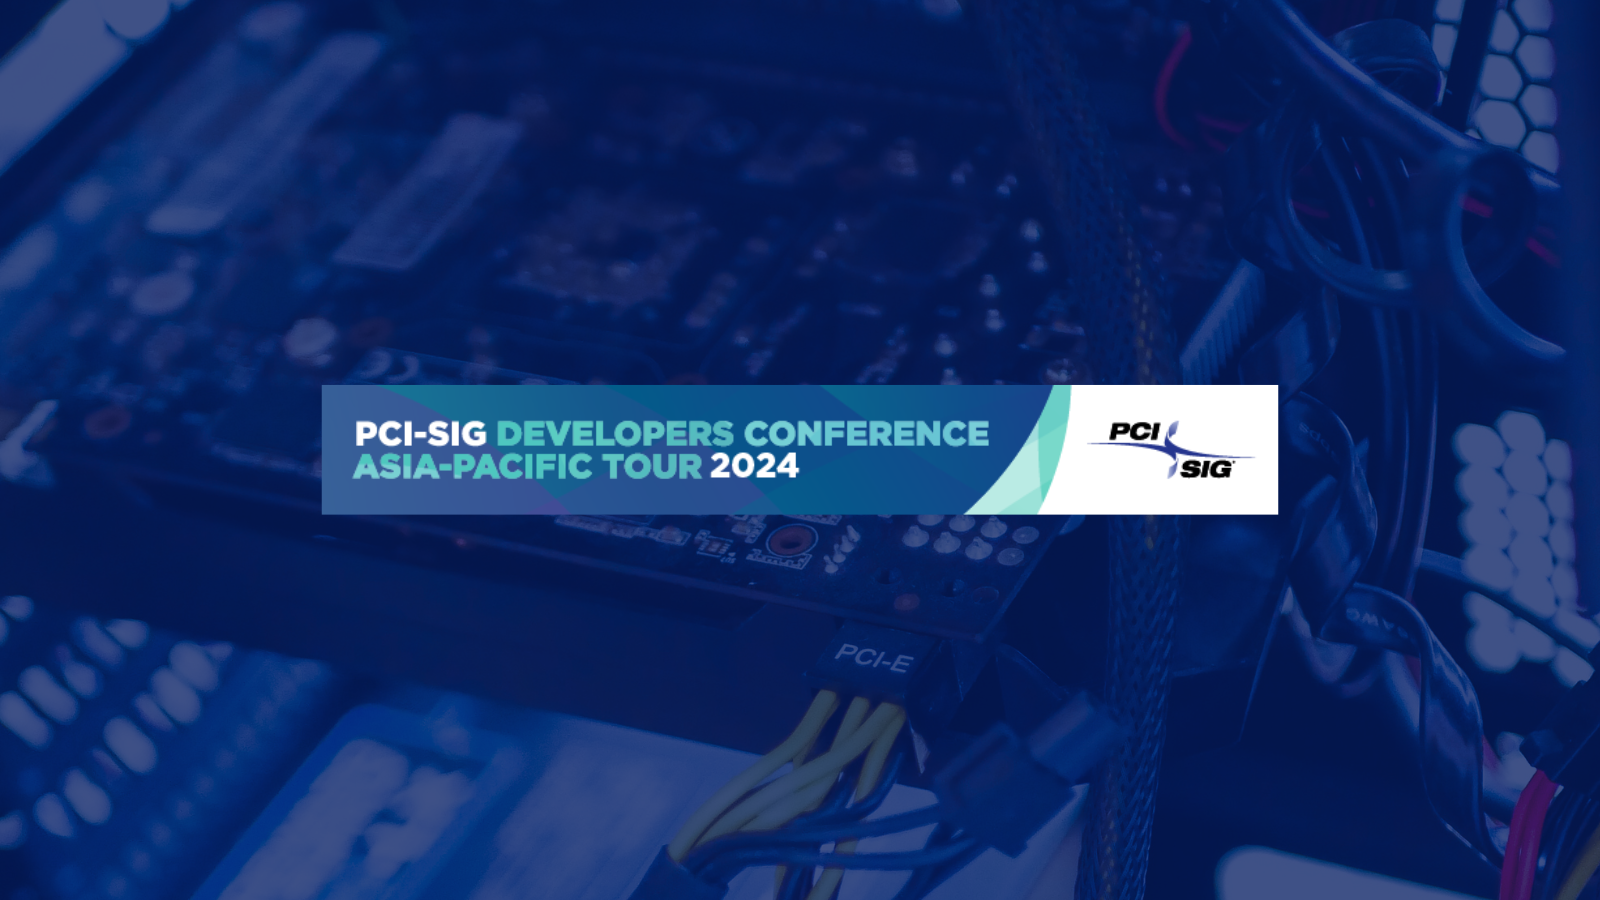 PCISIG® Developers Conference AsiaPacific Tour 2024